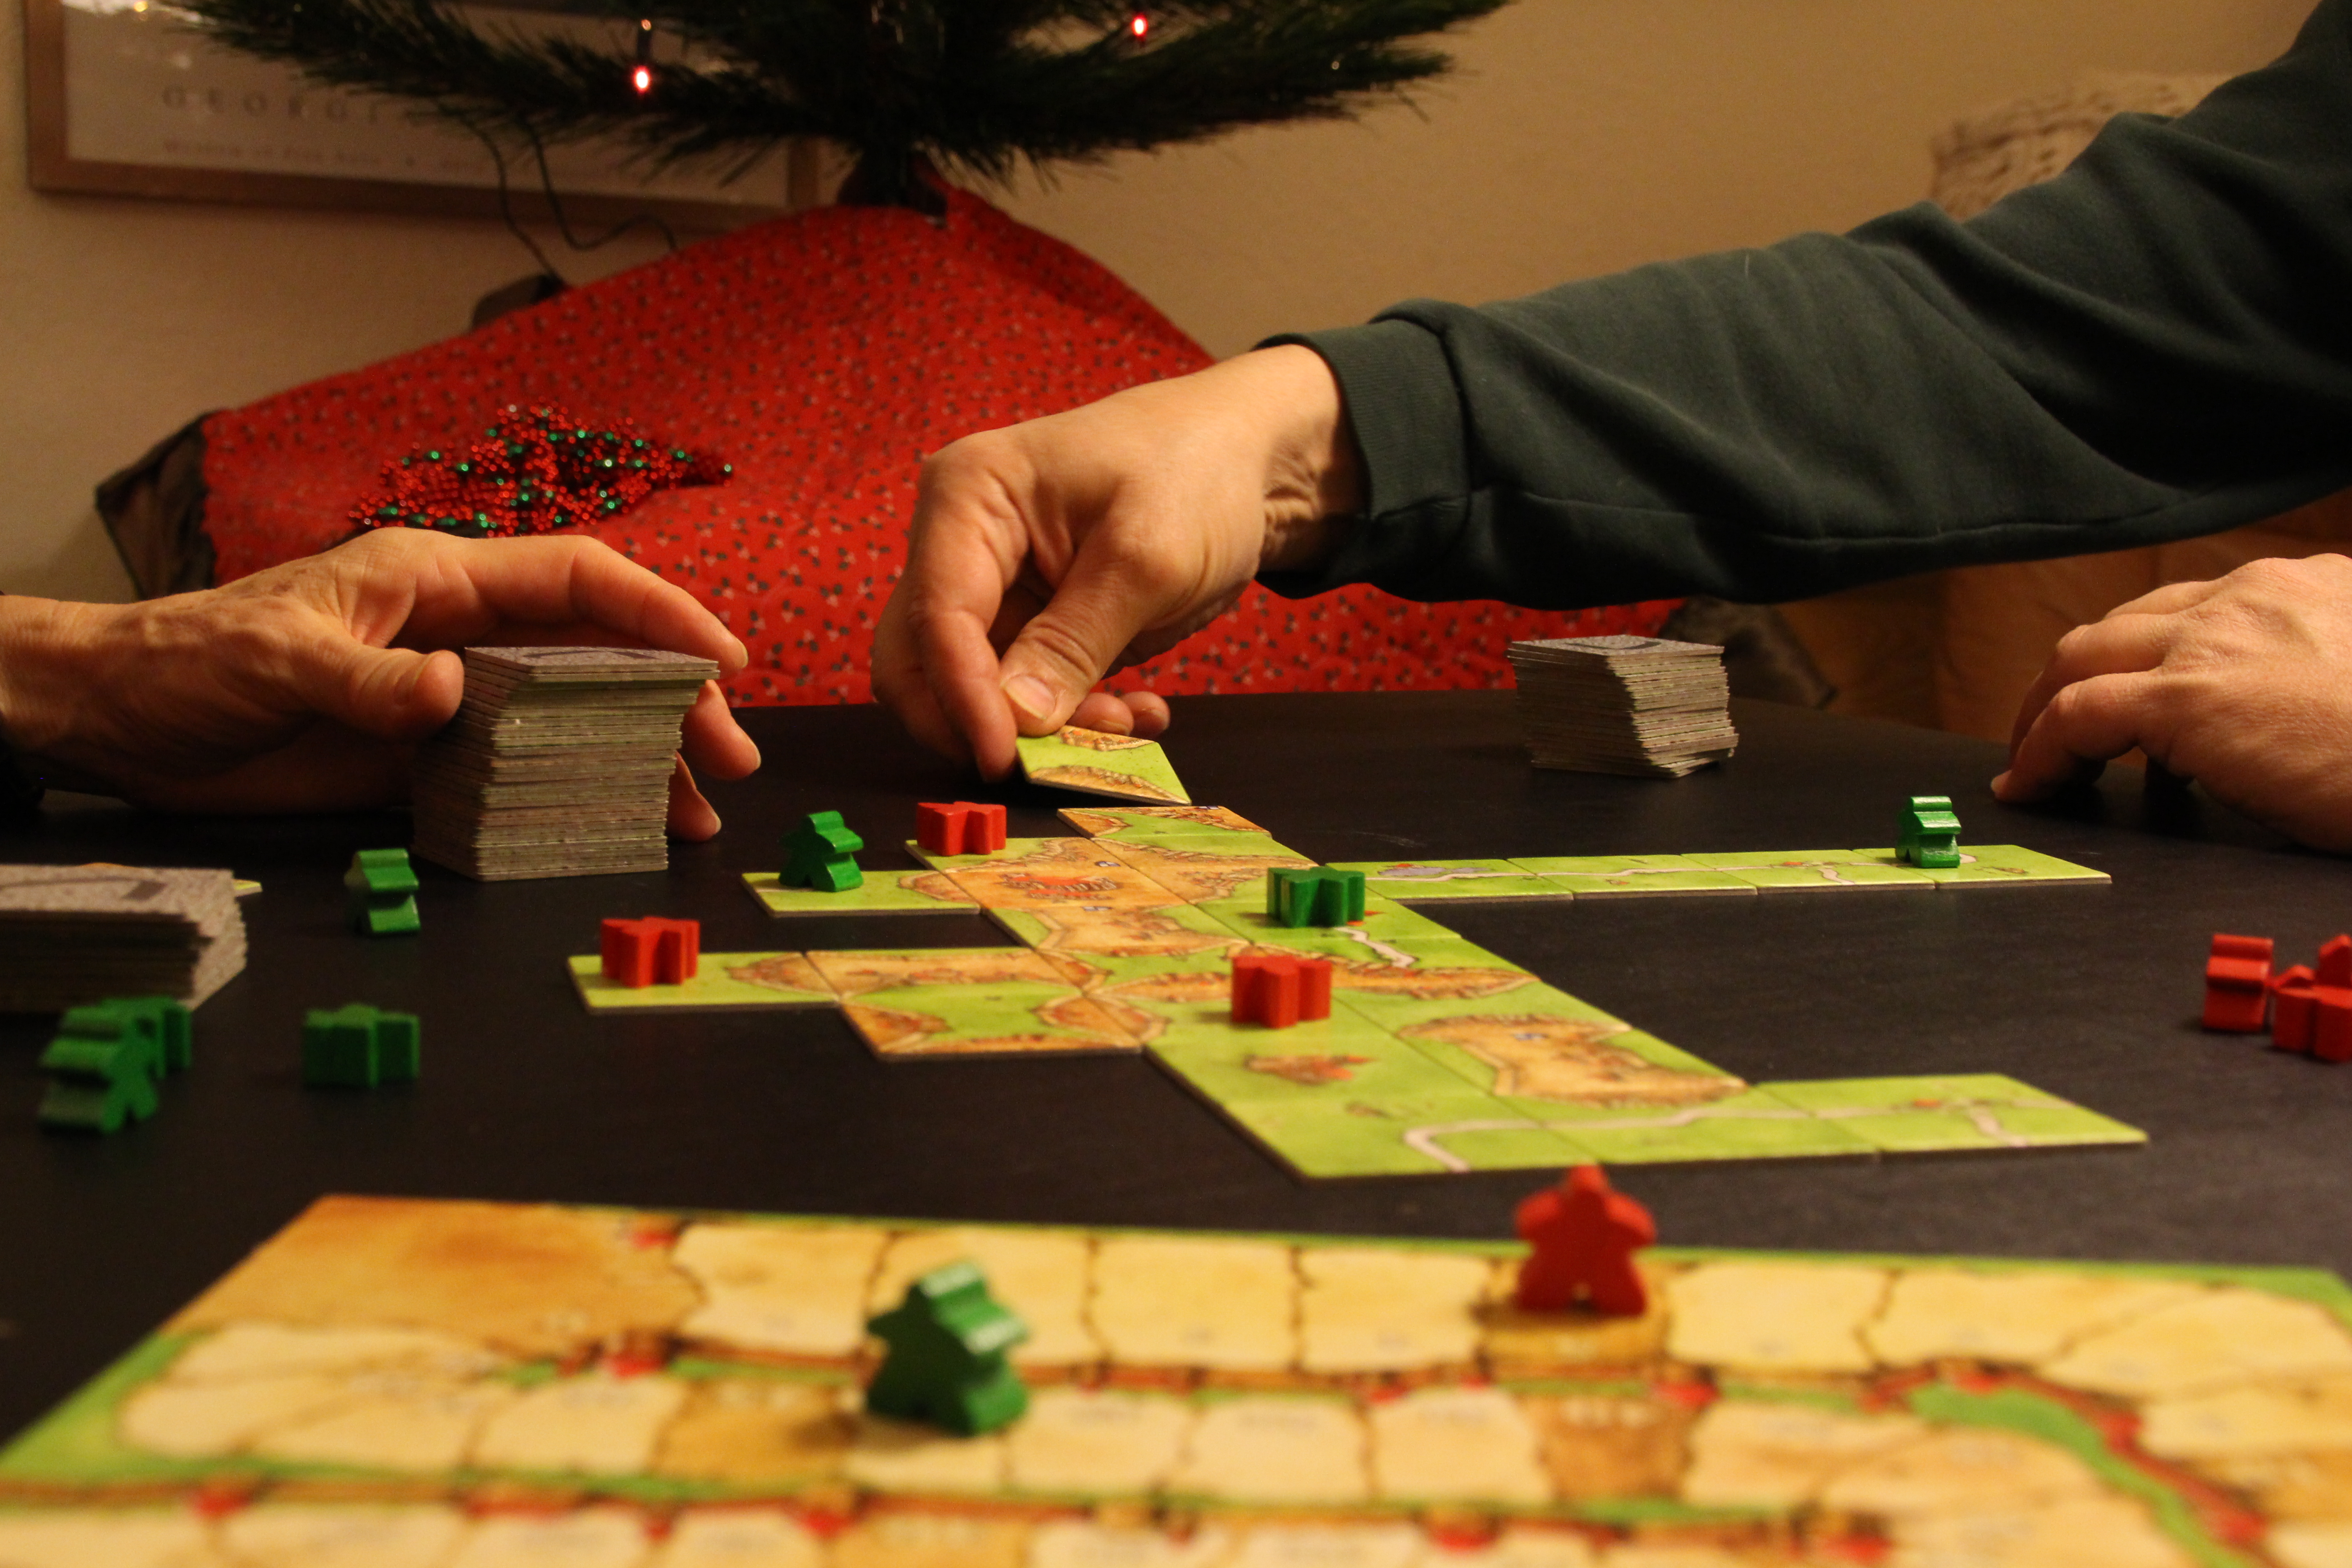 Festive times call for family gaming fun